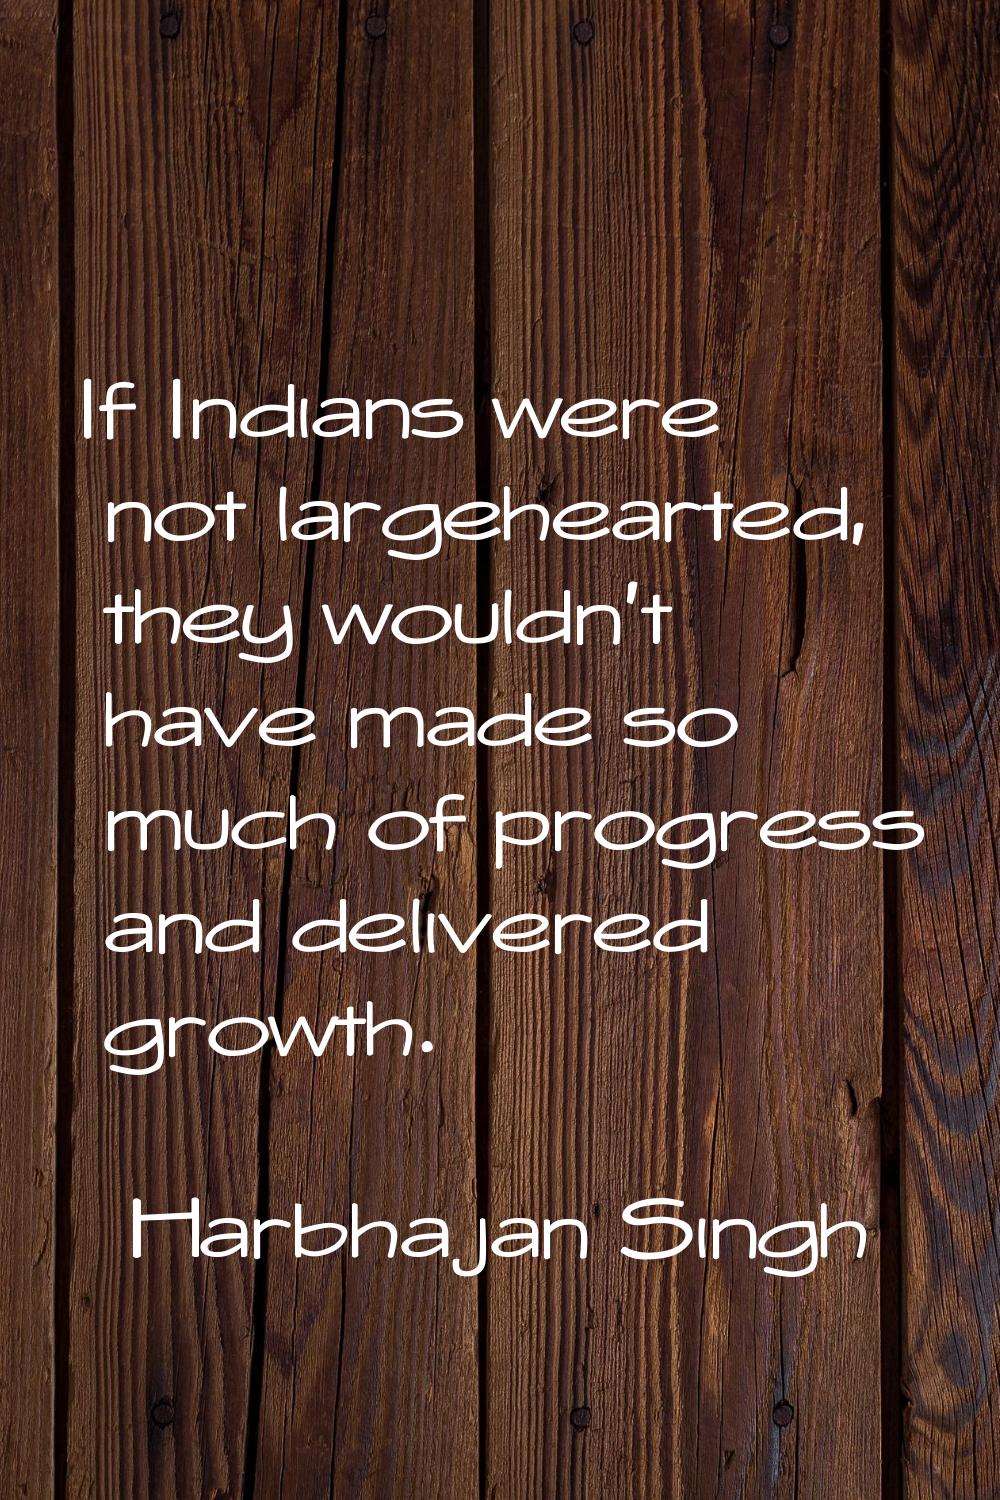 If Indians were not largehearted, they wouldn't have made so much of progress and delivered growth.